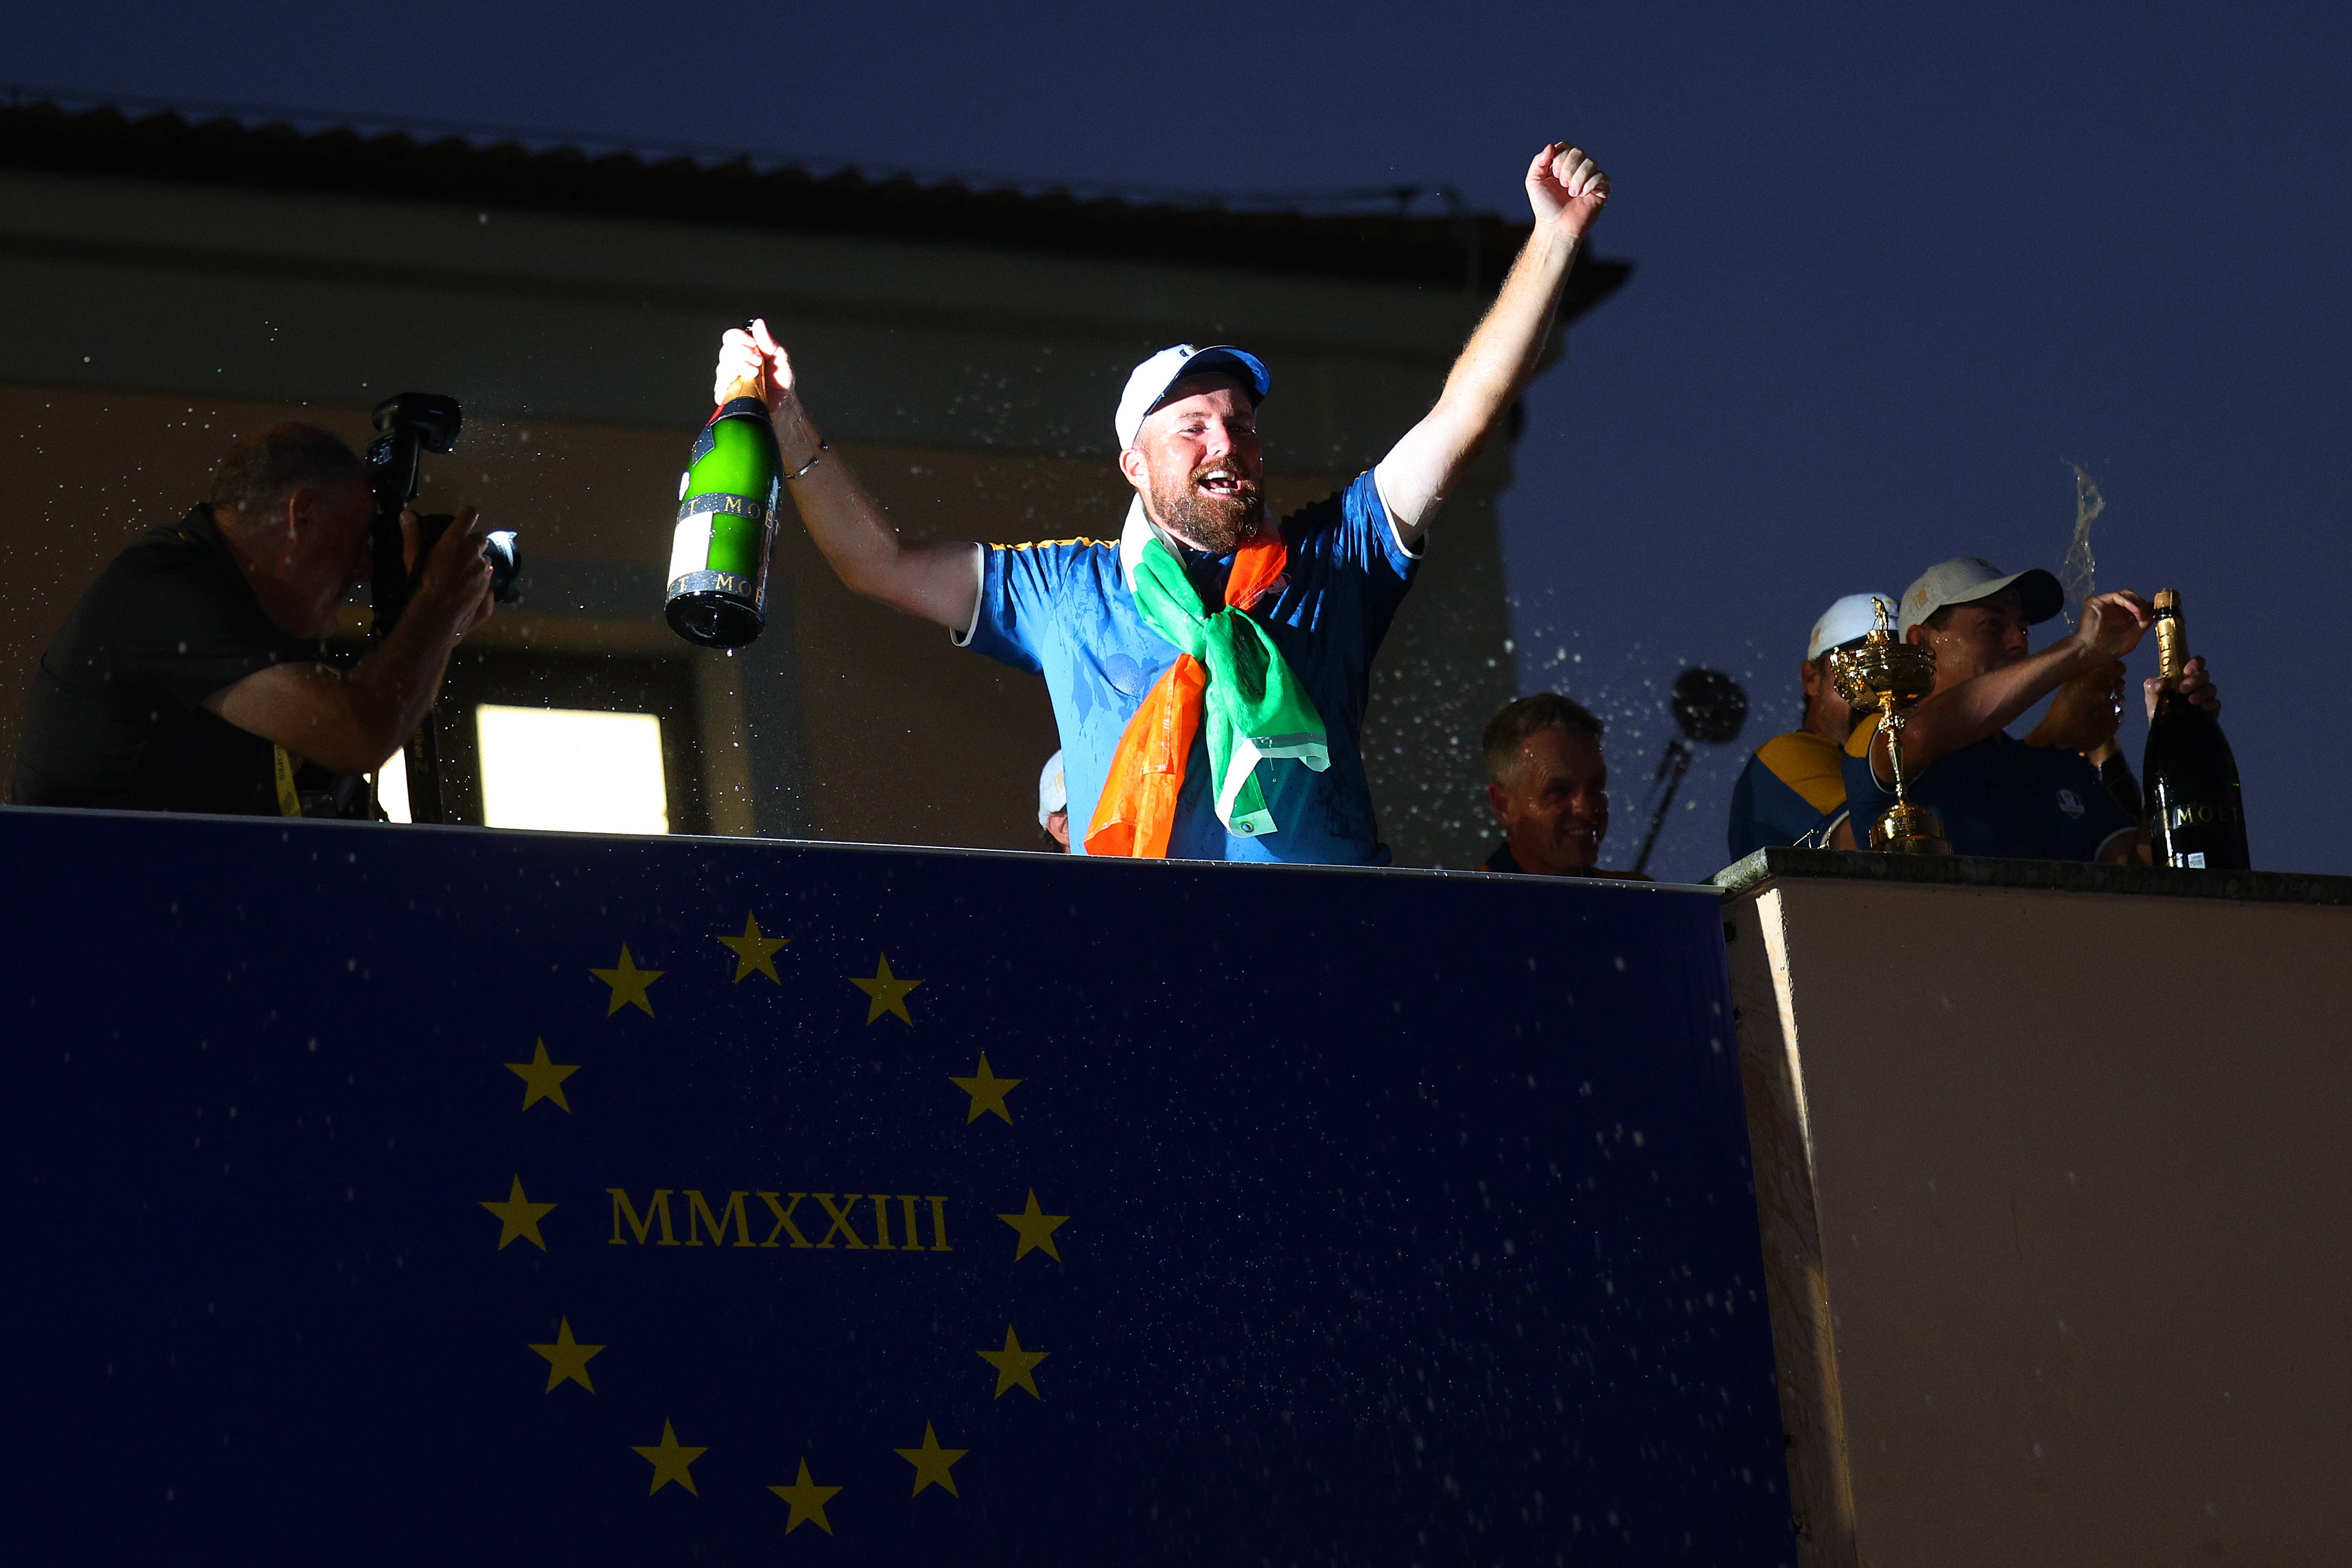 Shane Lowry helped Europe to Ryder Cup victory in Rome last year